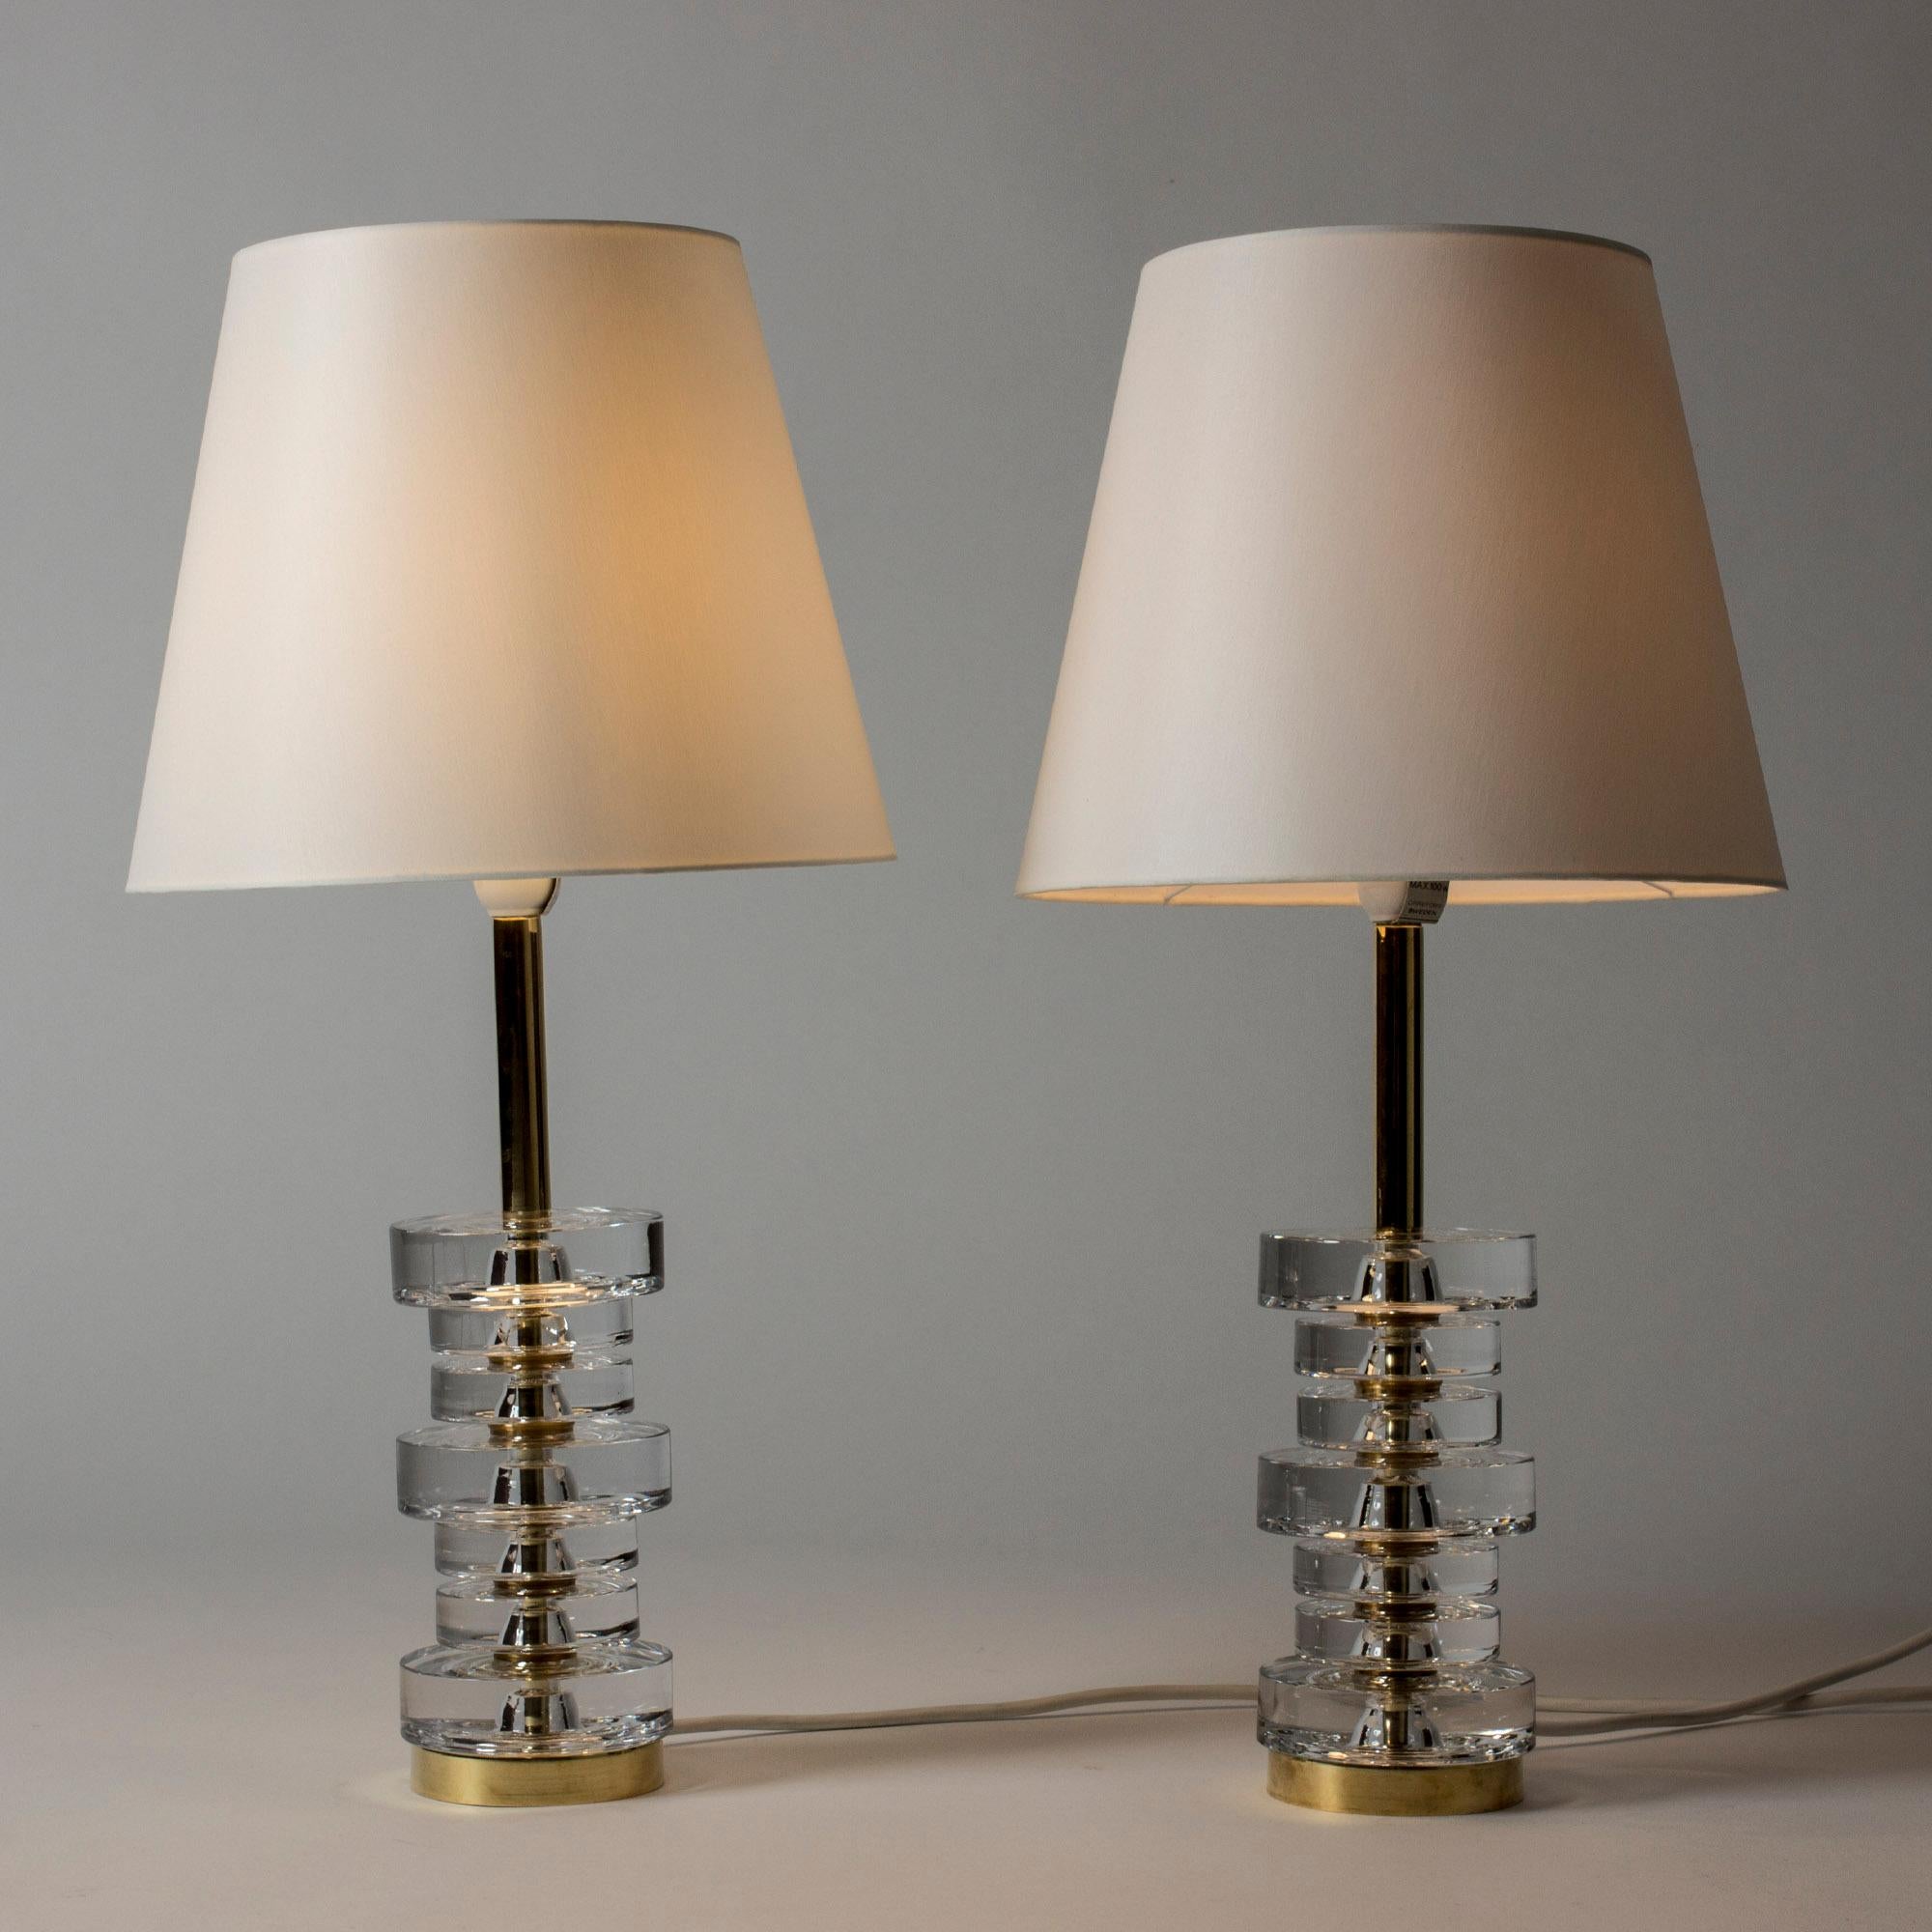 Swedish Pair of Glass and Brass Table Lamps by Carl Fagerlund for Orrefors, Sweden